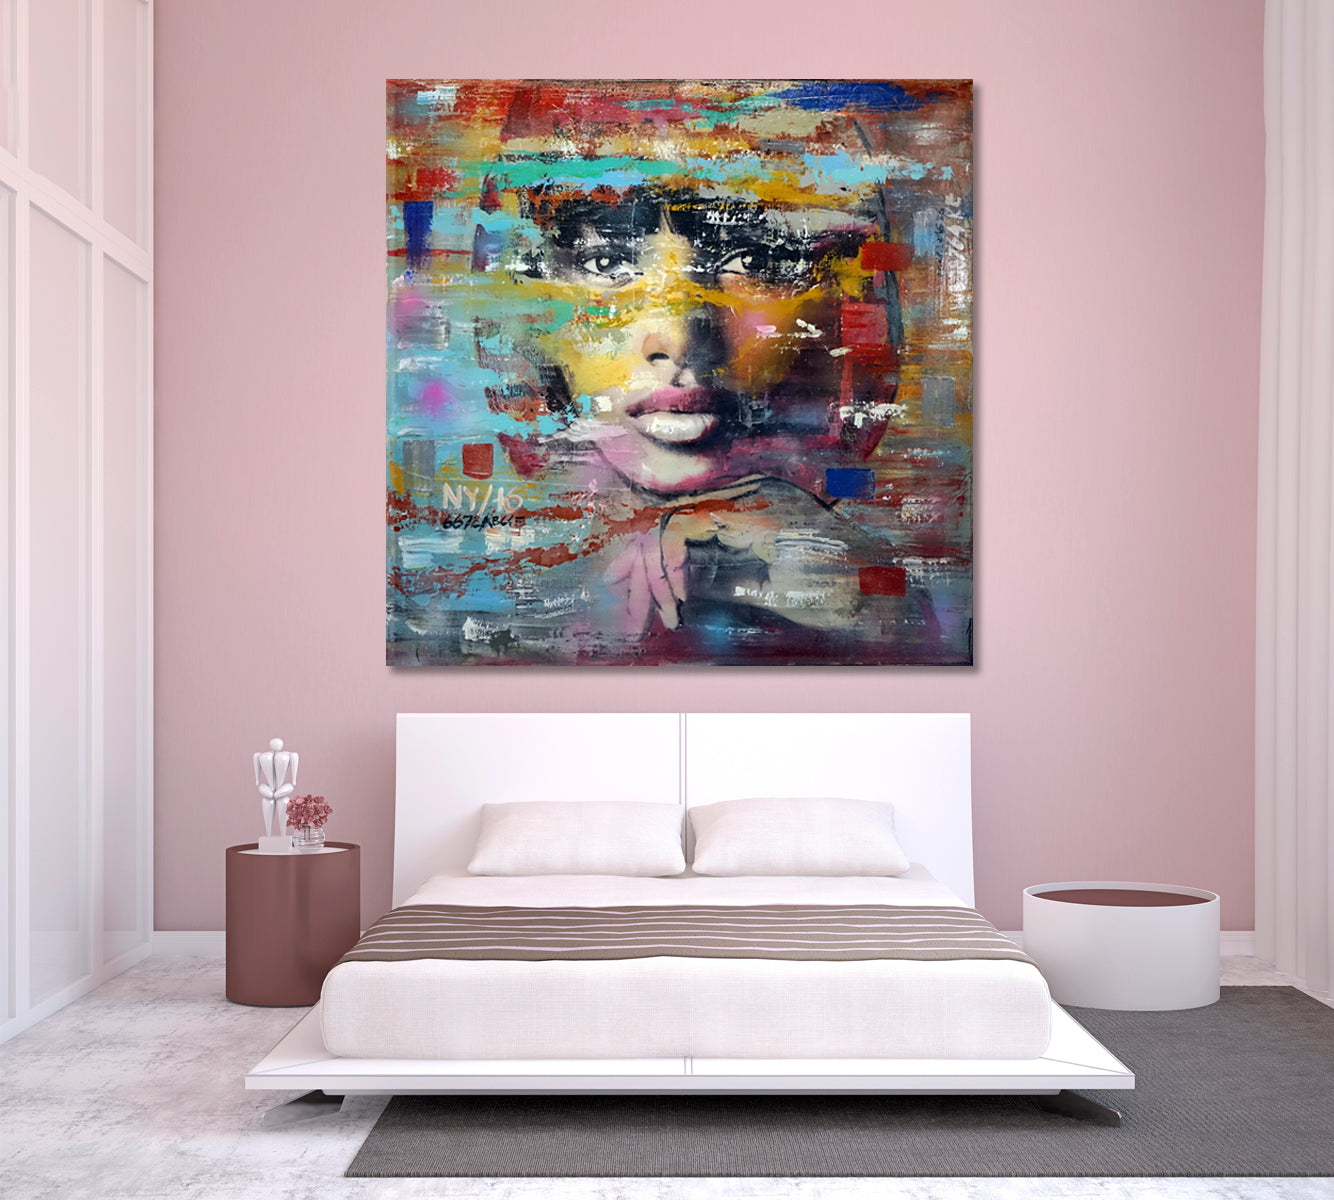 MISS VALERY Abstract Art Grunge Street Art Style Canvas Print - Square Contemporary Art Artesty   